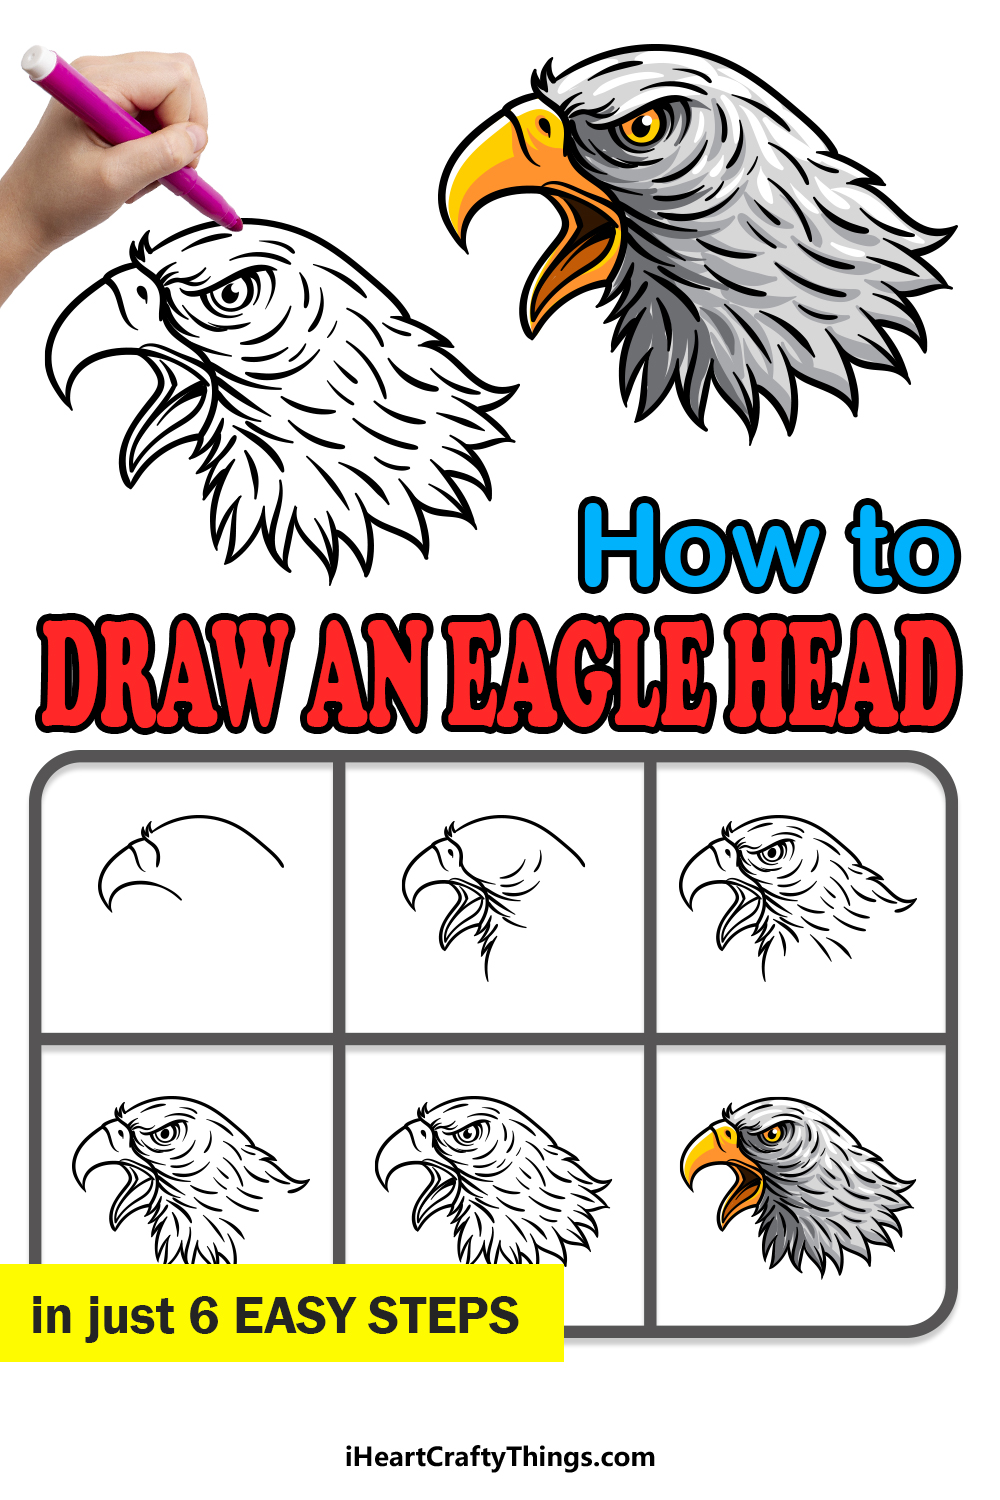 how to draw an Eagle Head in 6 easy steps